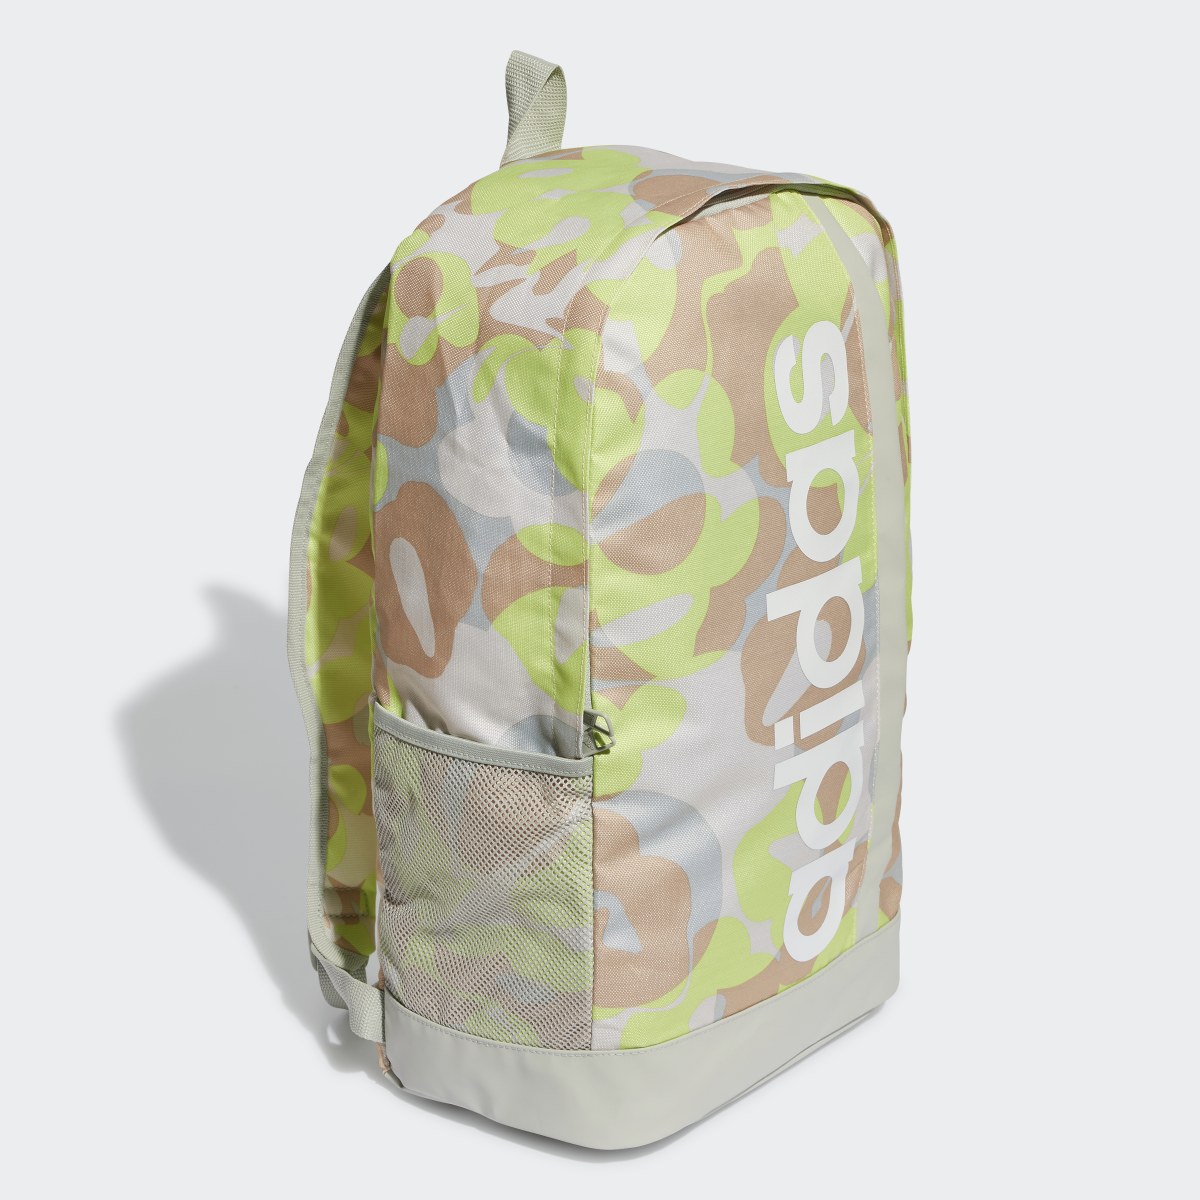 Adidas Linear Graphic Backpack. 4